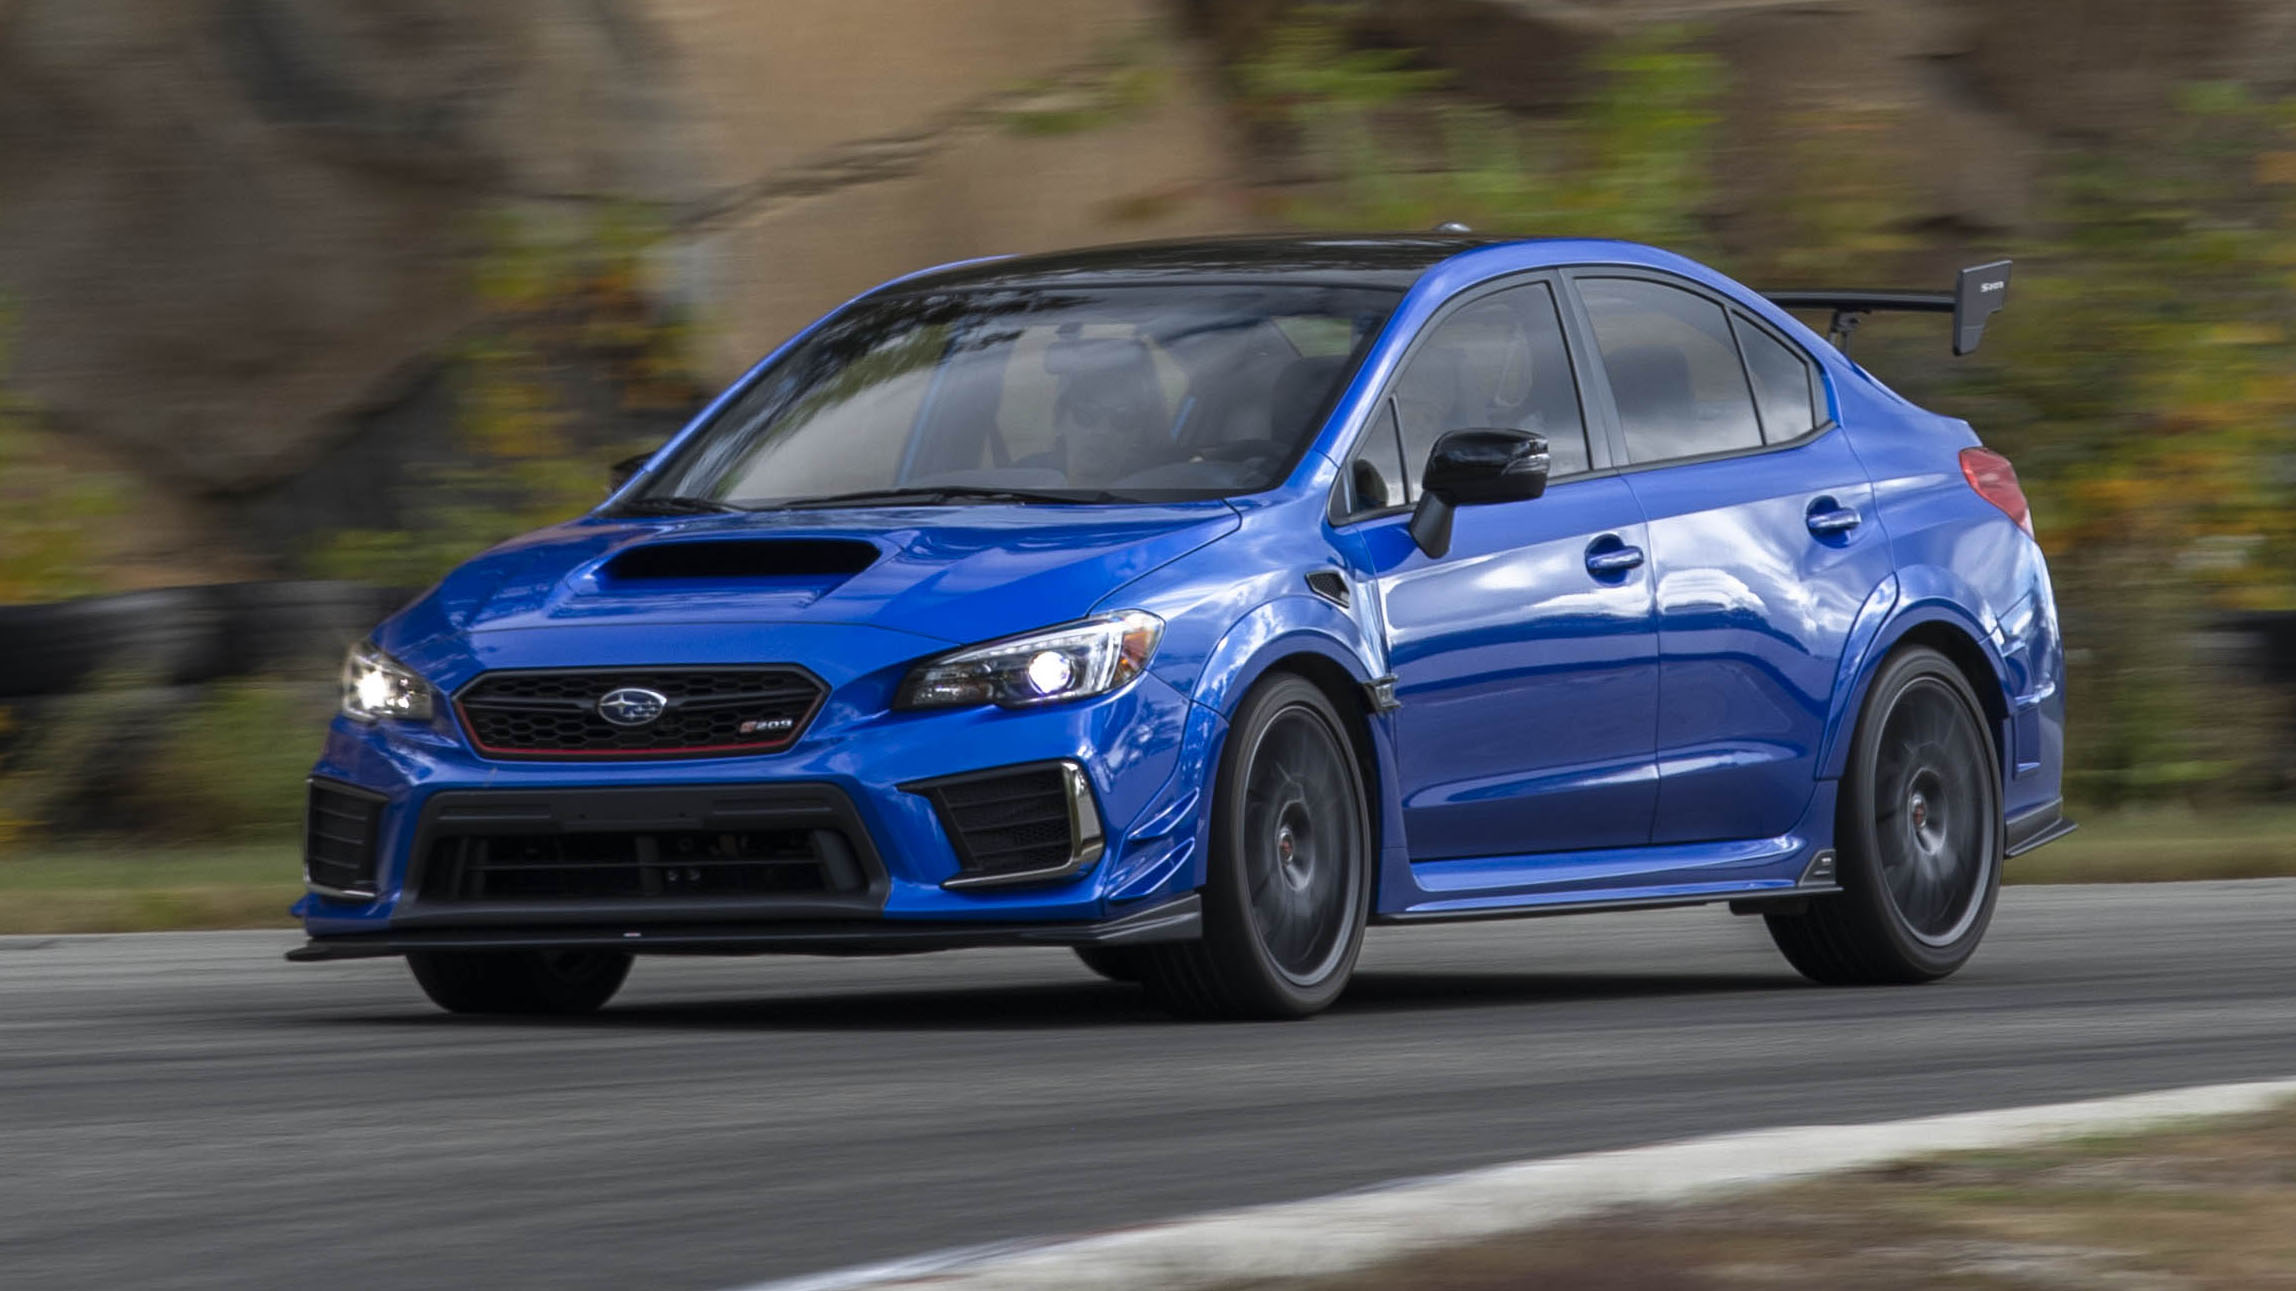 Subaru WRX STI S209 review: hardcore US-only saloon tested Reviews 2023 |  Top Gear